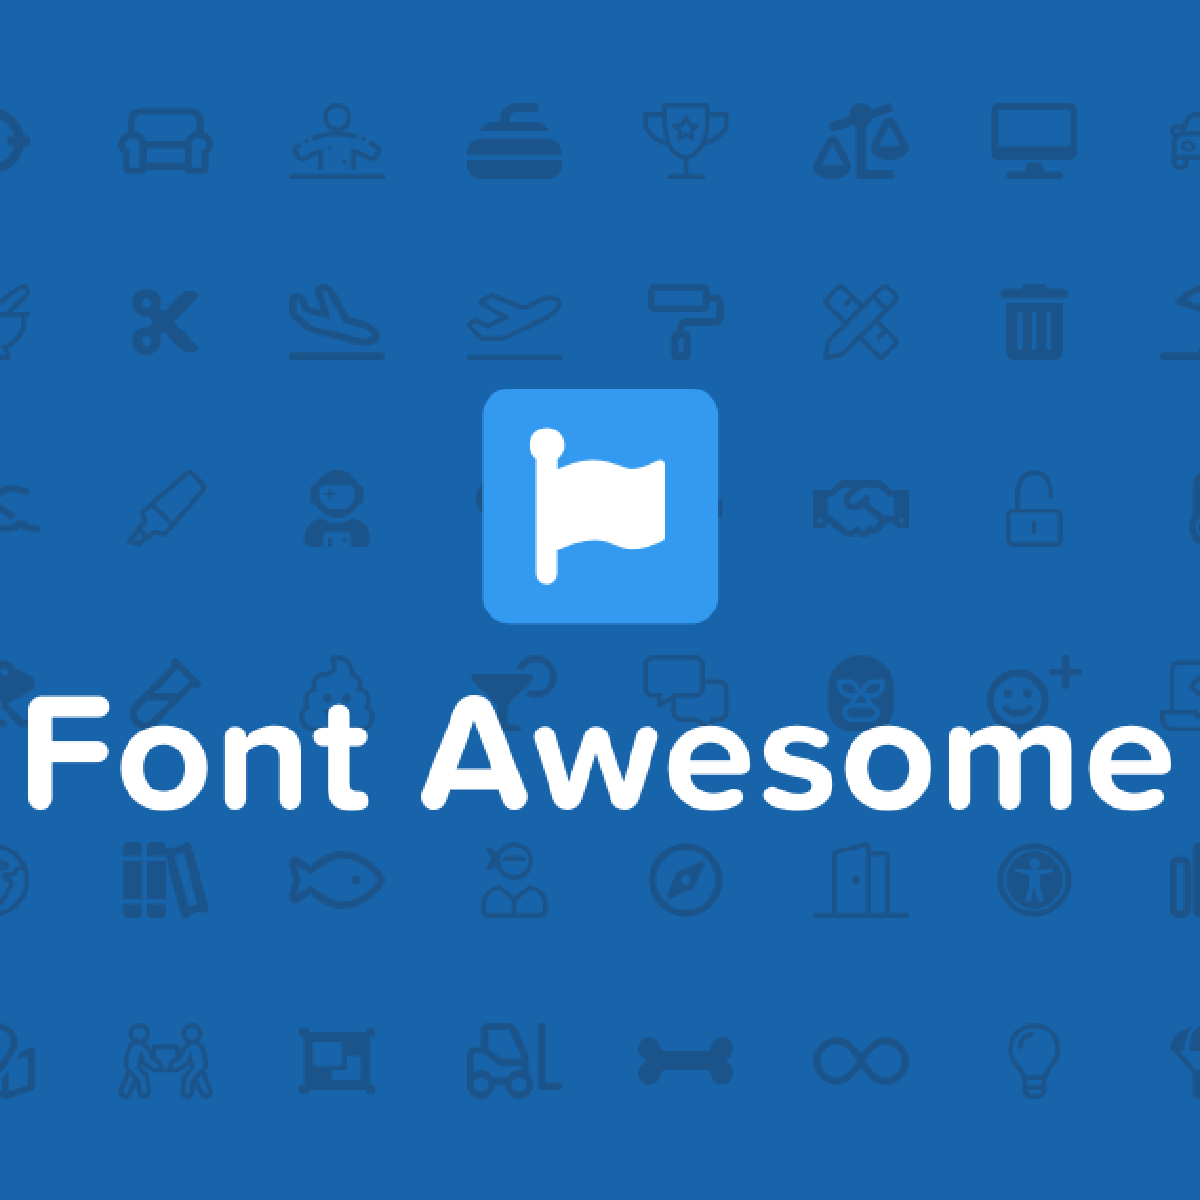 Download Using Font Awesome 5 With Webpack | PullRequest Blog